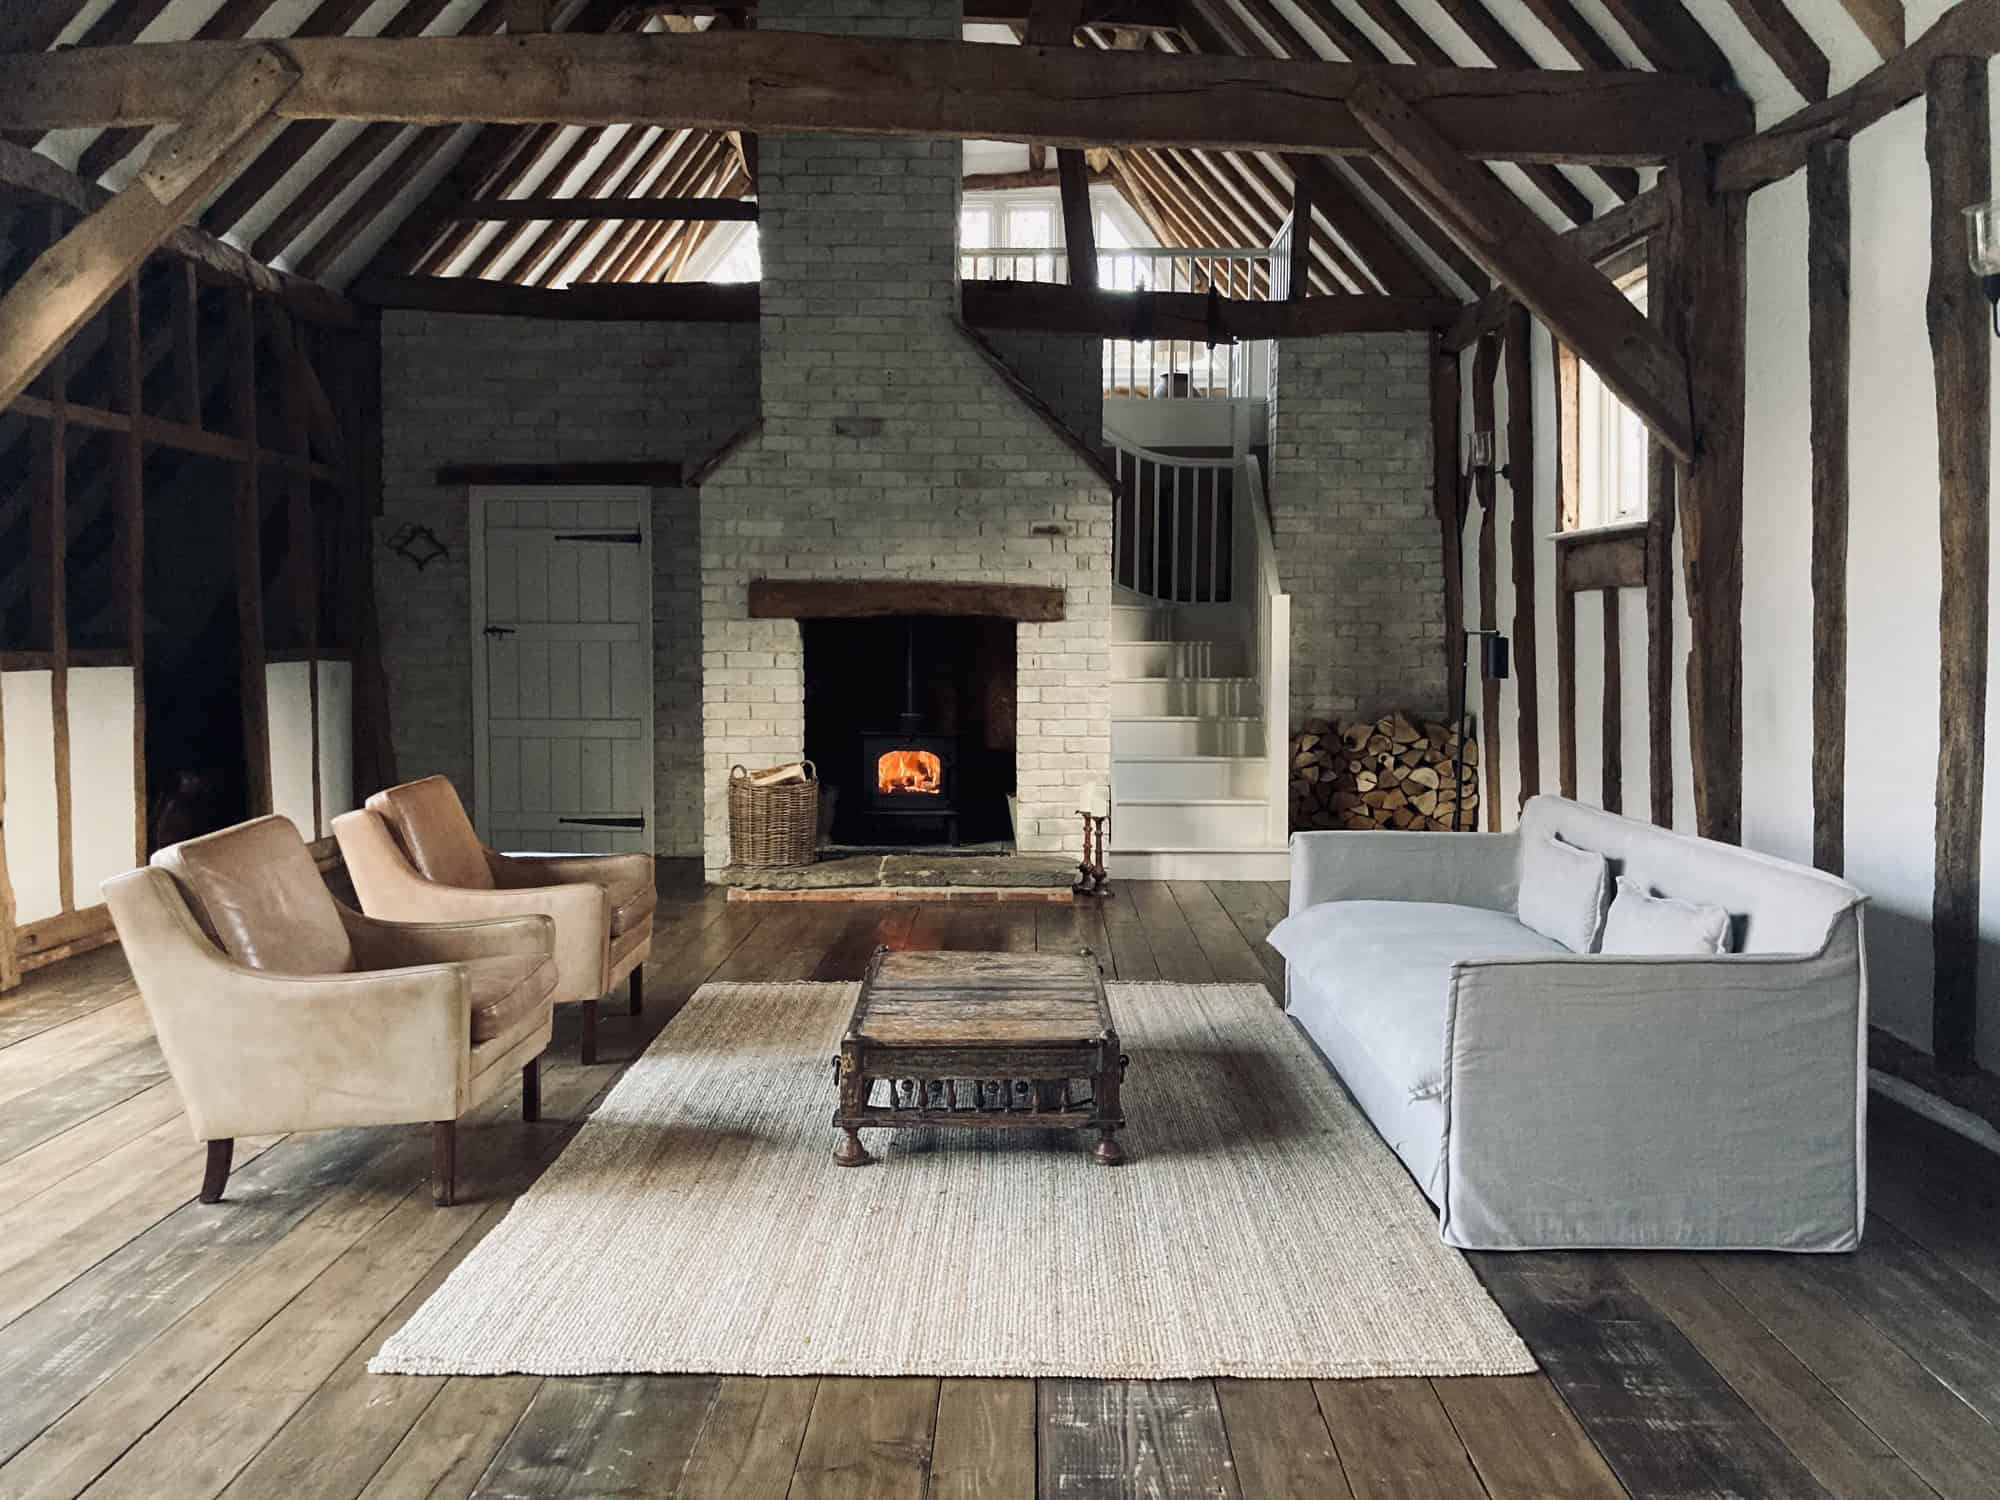 Hambledon PO7 - A beautiful barn conversion in the South Downs National Park. Available to hire for commercial photography and filming - The Location Guys